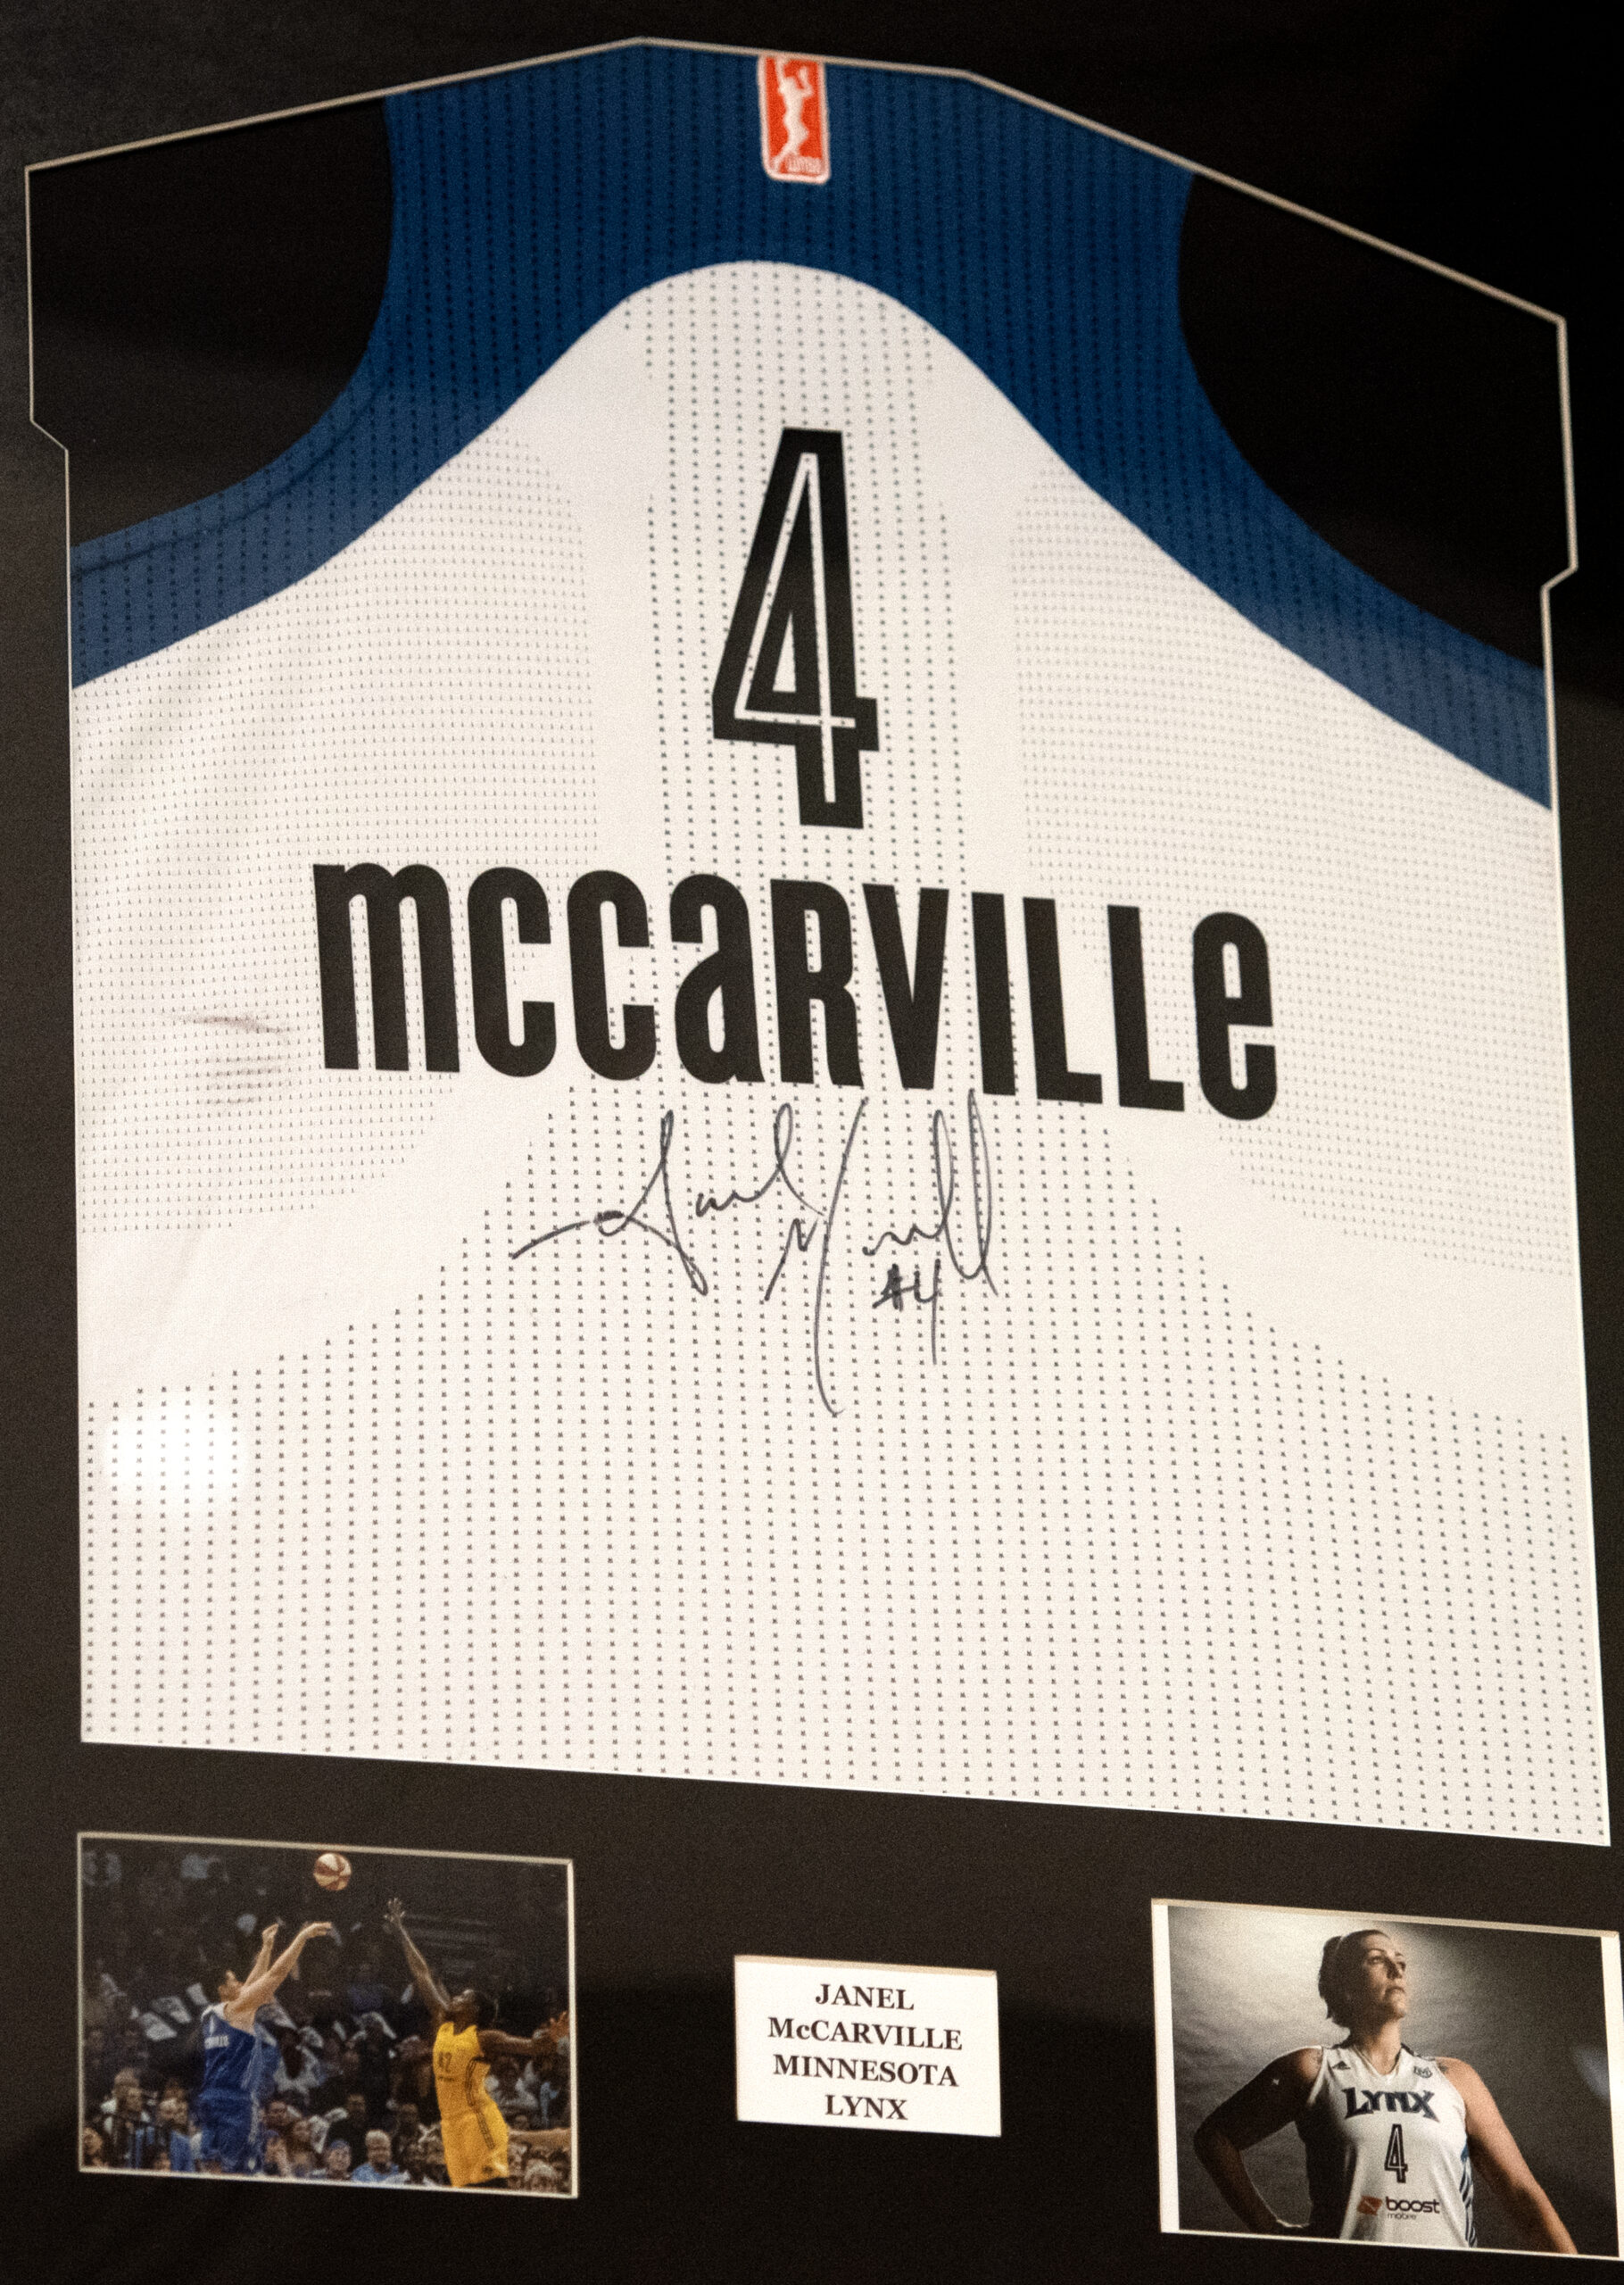 Janel McCarville’s autographed jersey hangs outside the gymnasium on Thursday, Nov. 9, 2023, at Stevens Point Area Senior High in Stevens Point, Wisconsin. (Angela Major/WPR)